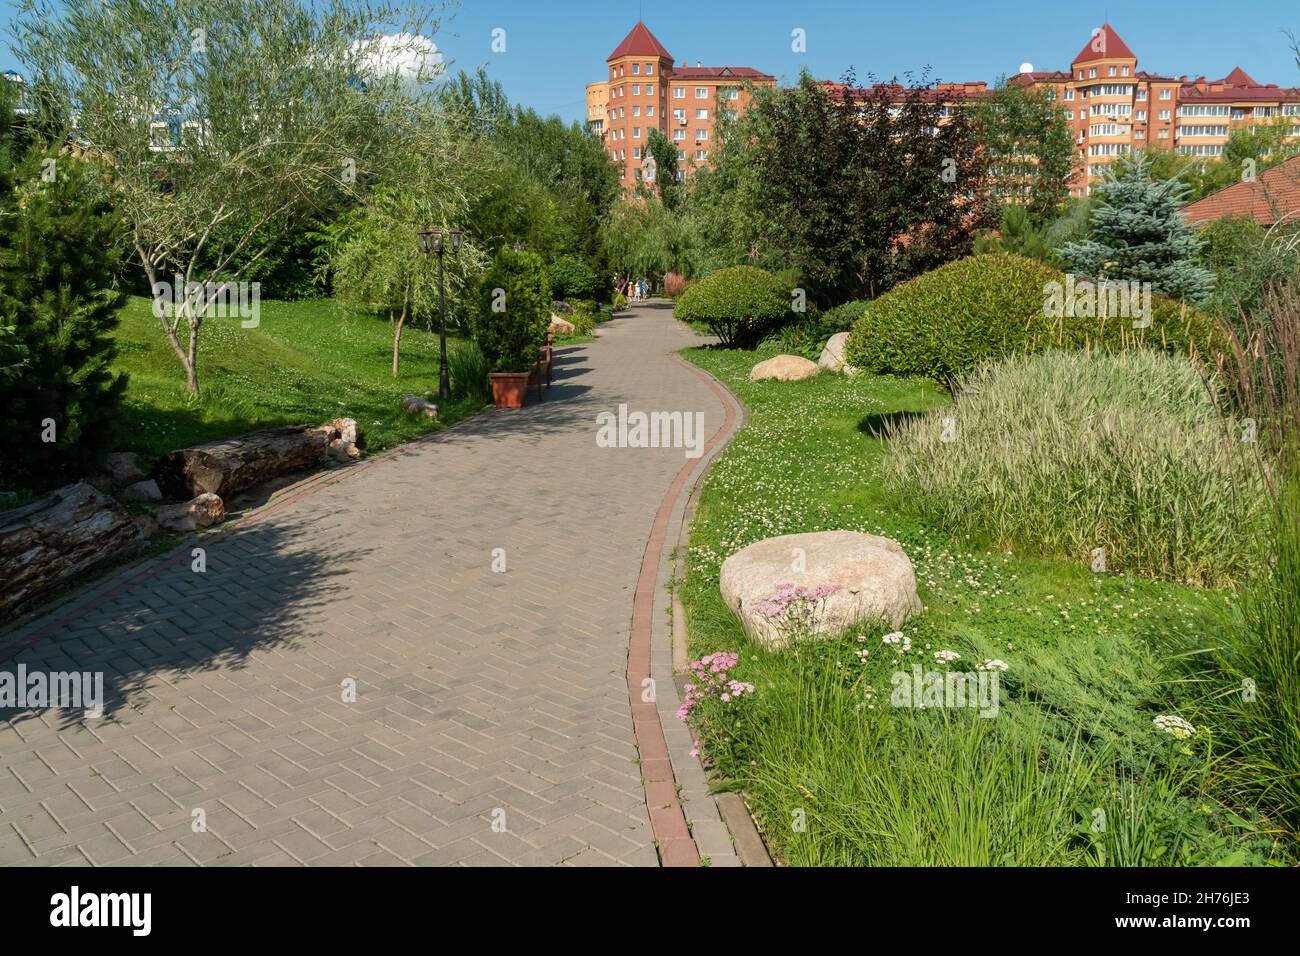 A flexible path between ornamental plants leads through the park to residential buildings on a sunny summer day. Stock Photo